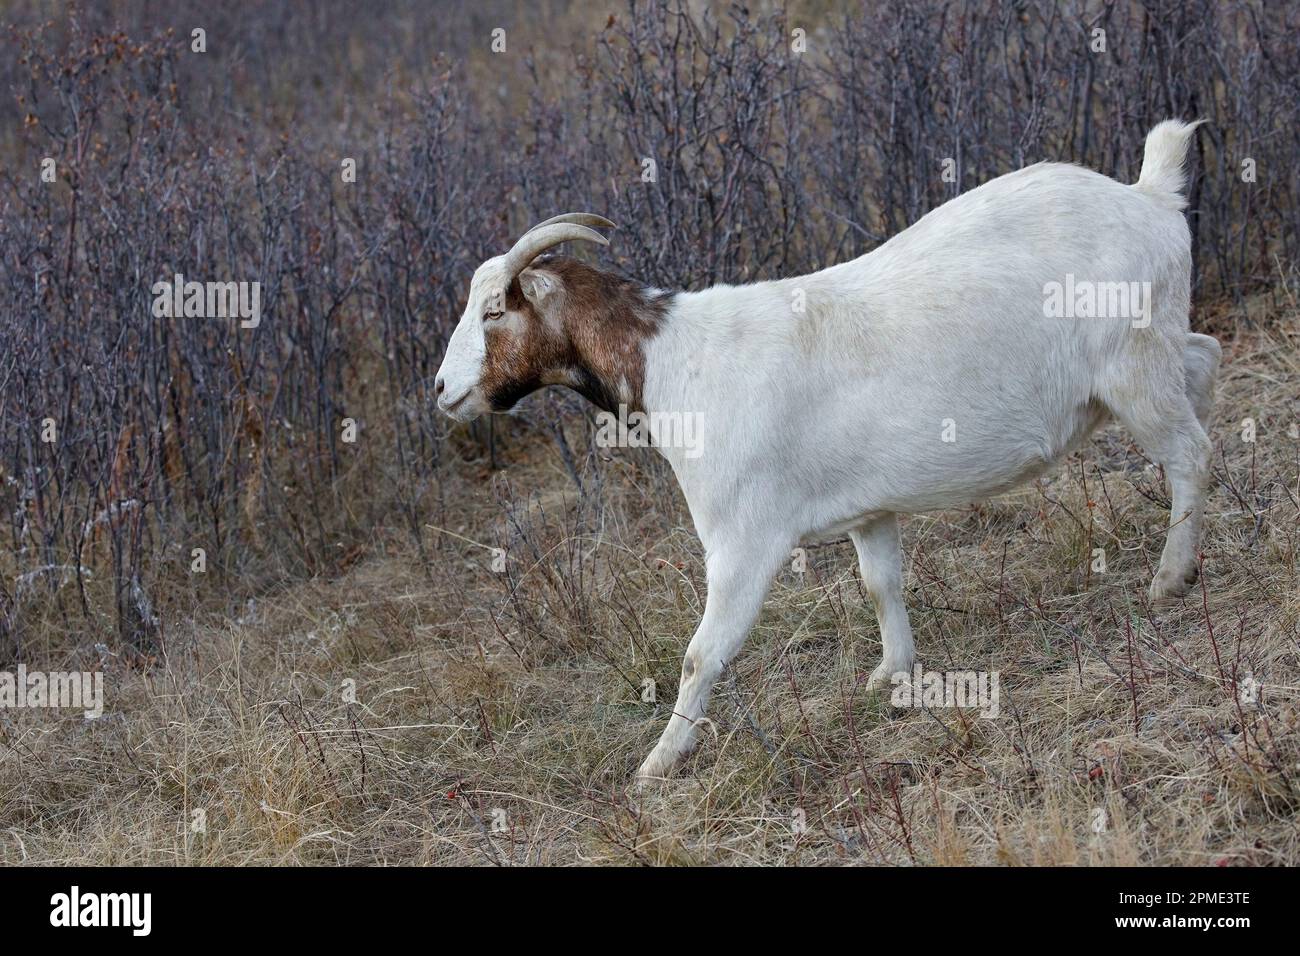 Domestic female brown and white goat walking through grassland with shrubs. The animal is part of a natural weed control project in Nose Hill Park. Stock Photo